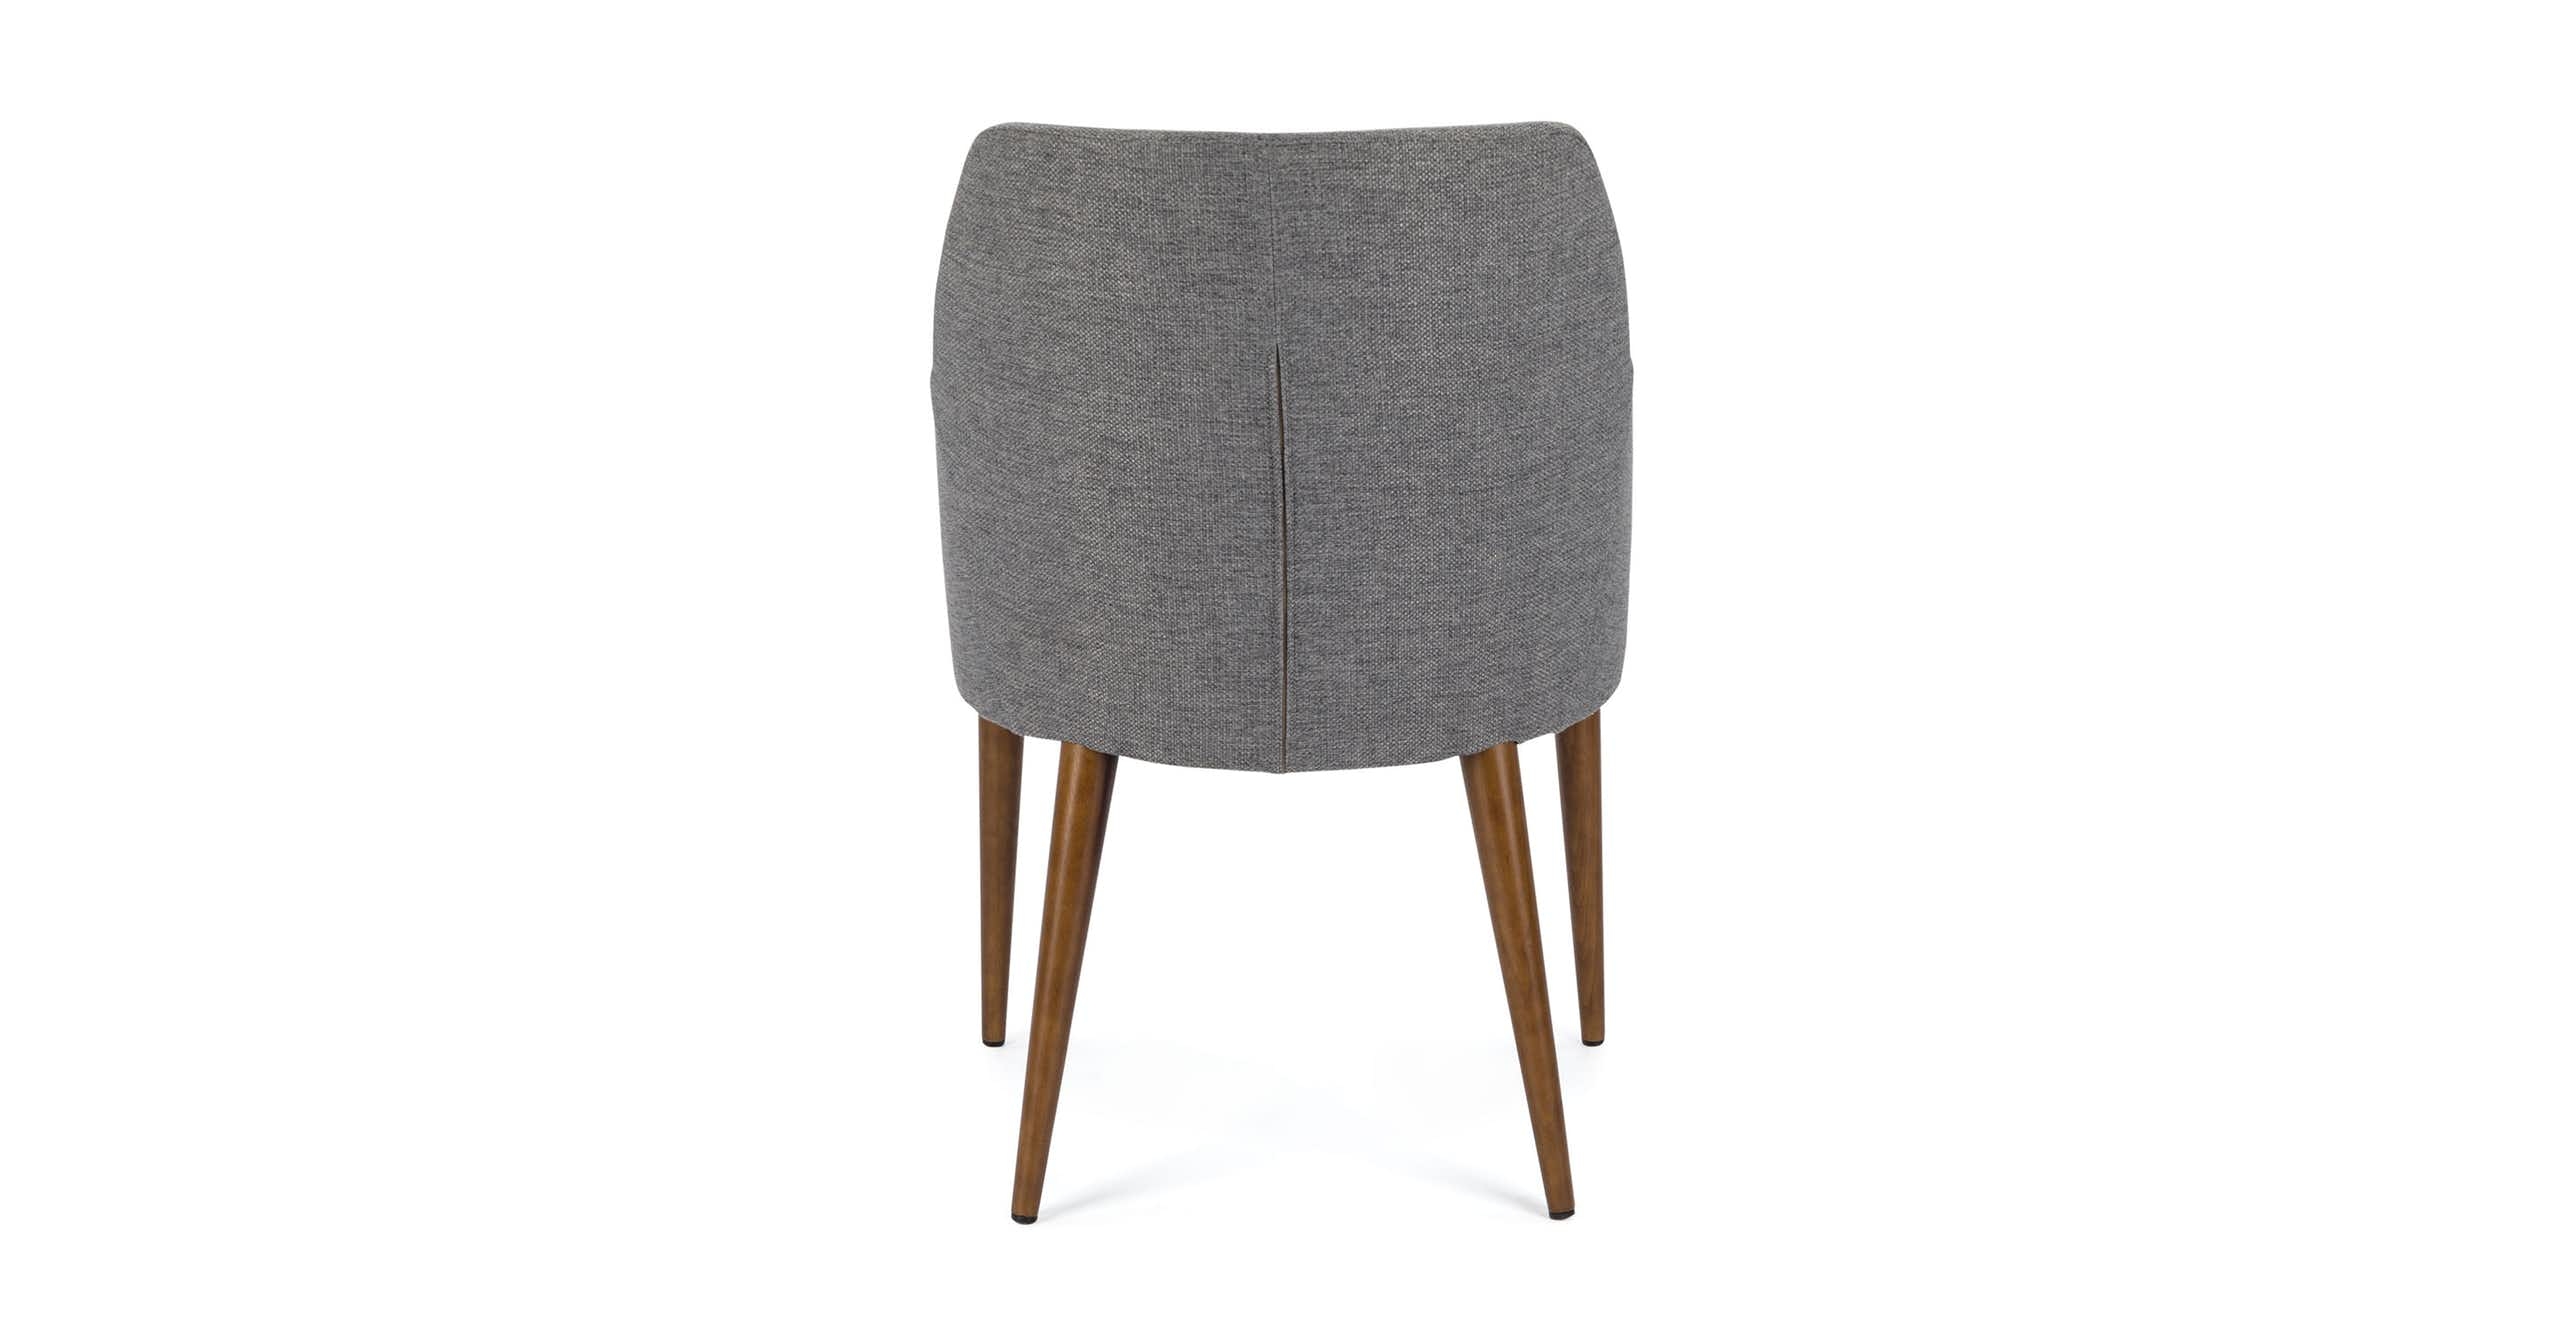 Feast Gravel Gray Dining Chair, pair - Image 2